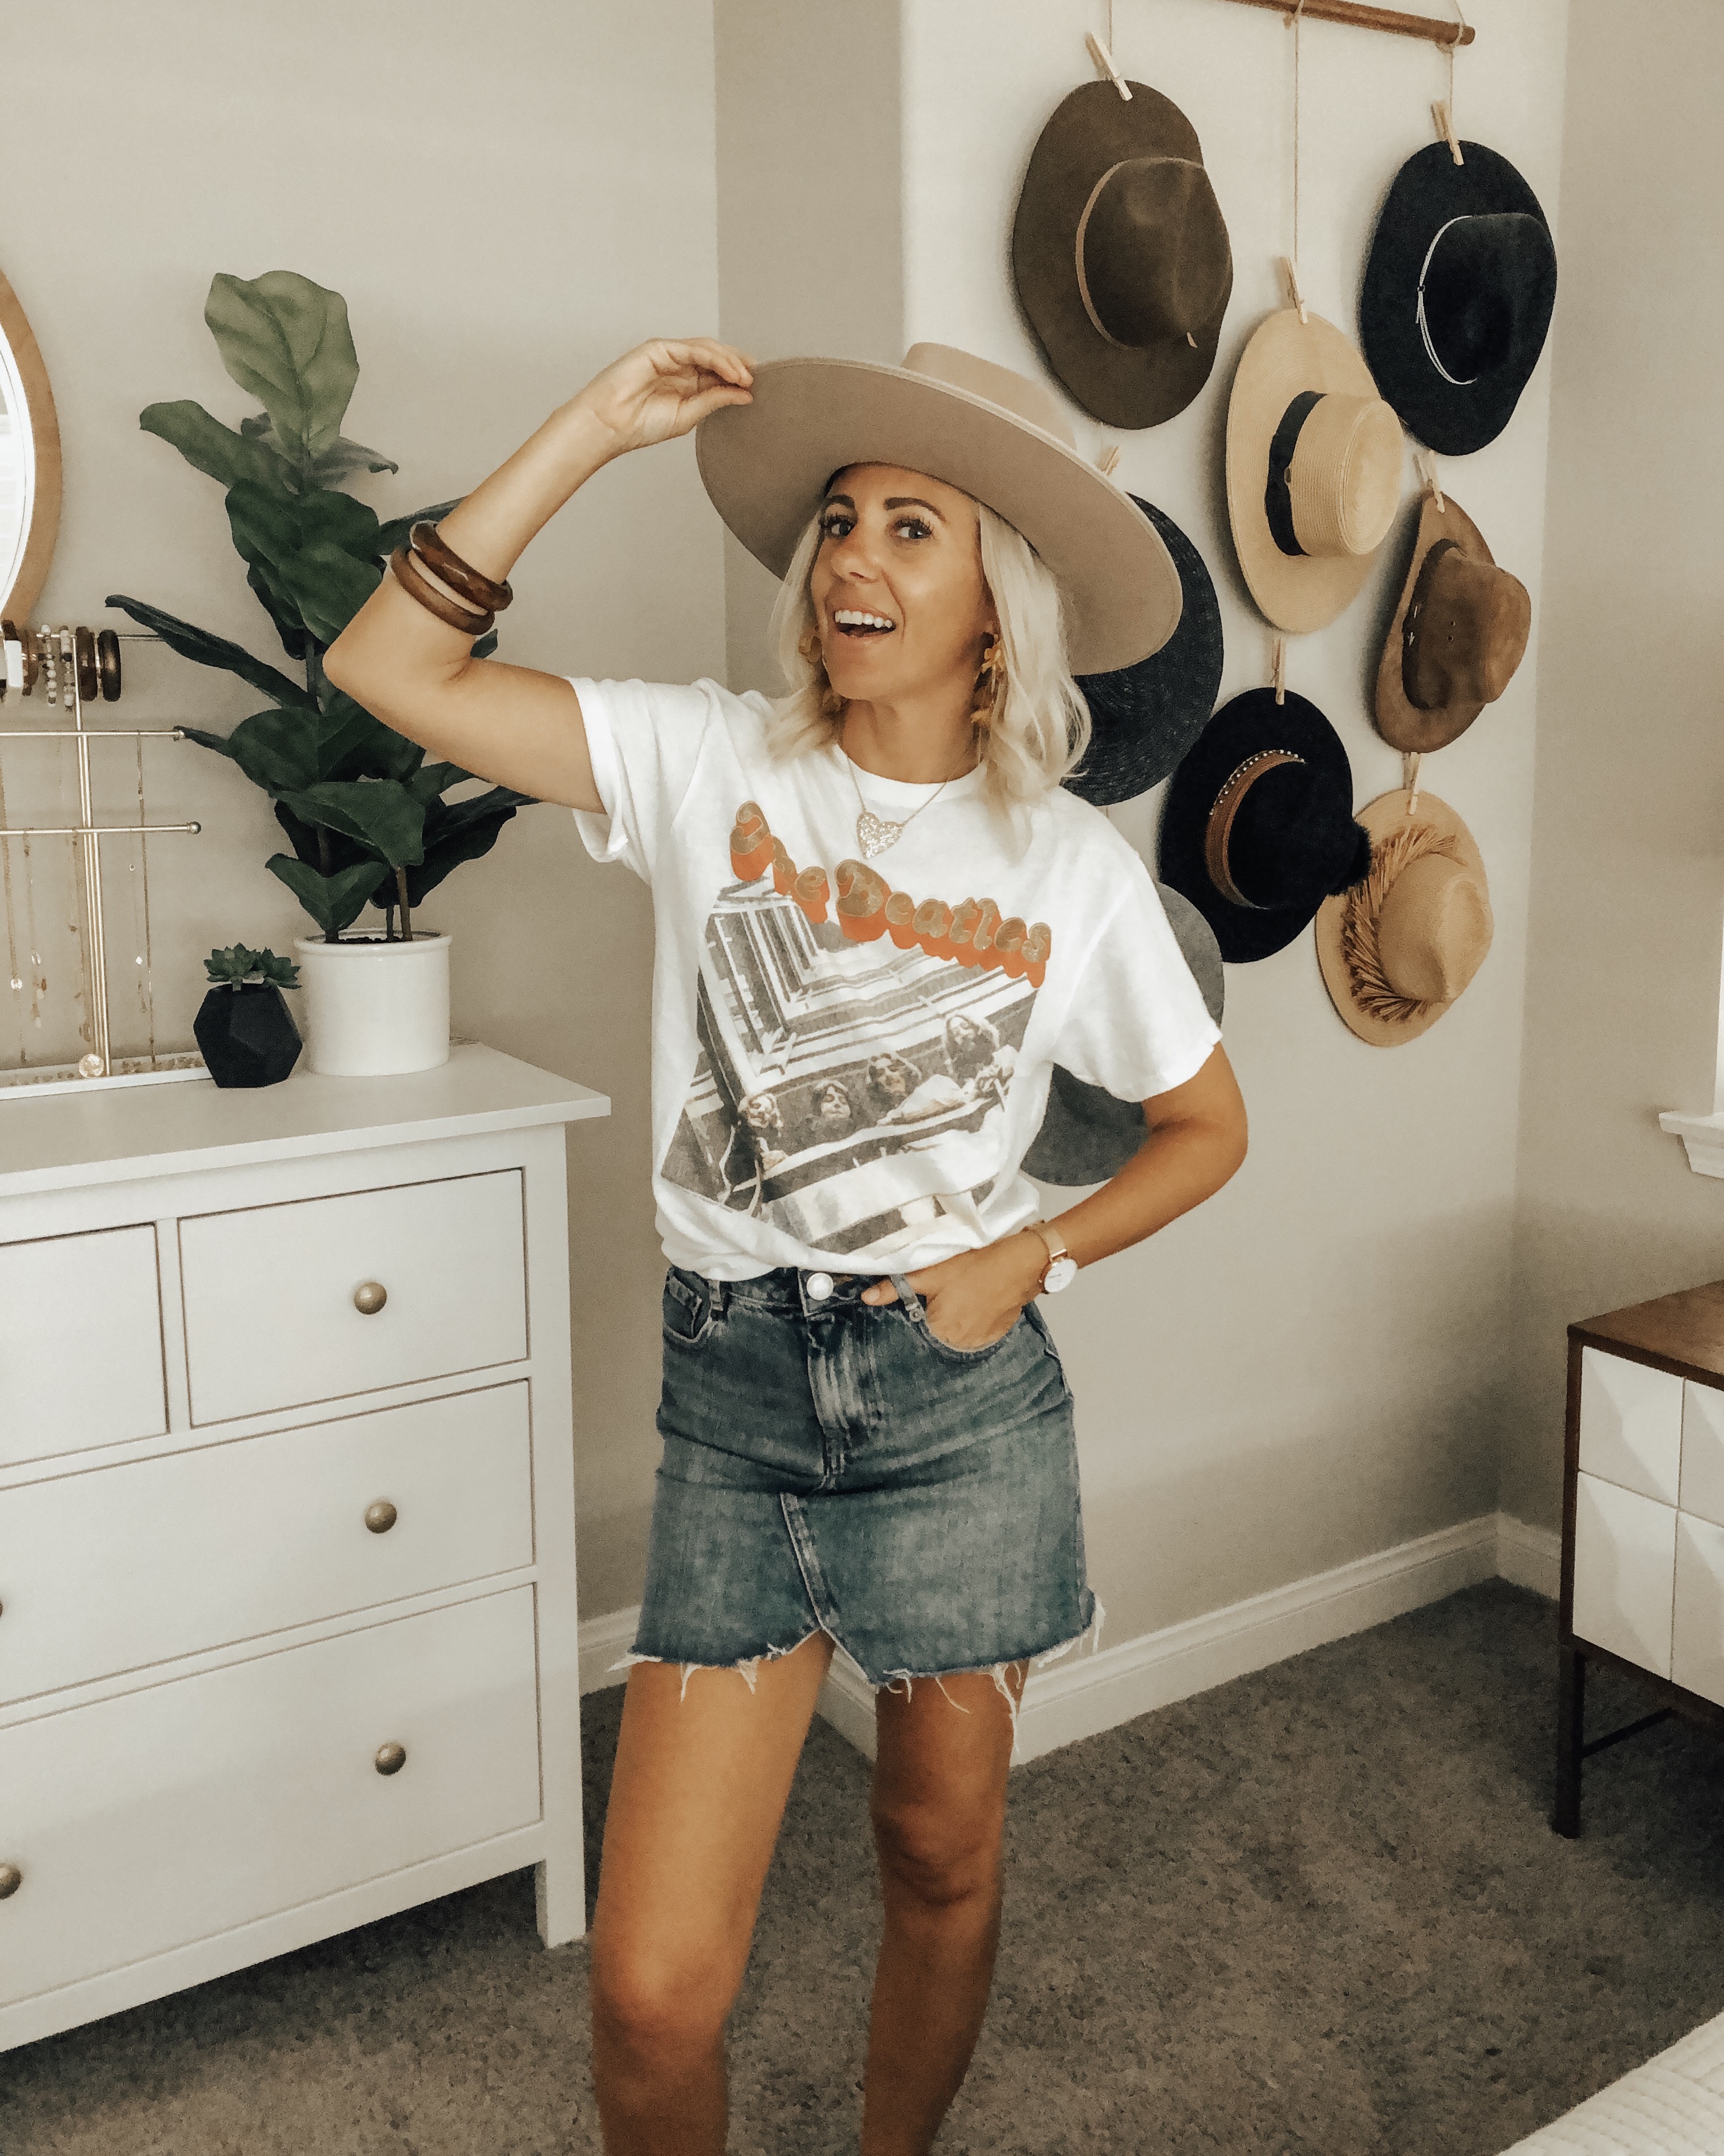 CURRENT FAVORITE HATS FROM A CRAZY HAT LADY- Jaclyn De Leon Style + Sharing all my favorite hats from straw hats to wide brim felt hats and more. Also sharing my expensive hats and designer dupes too.